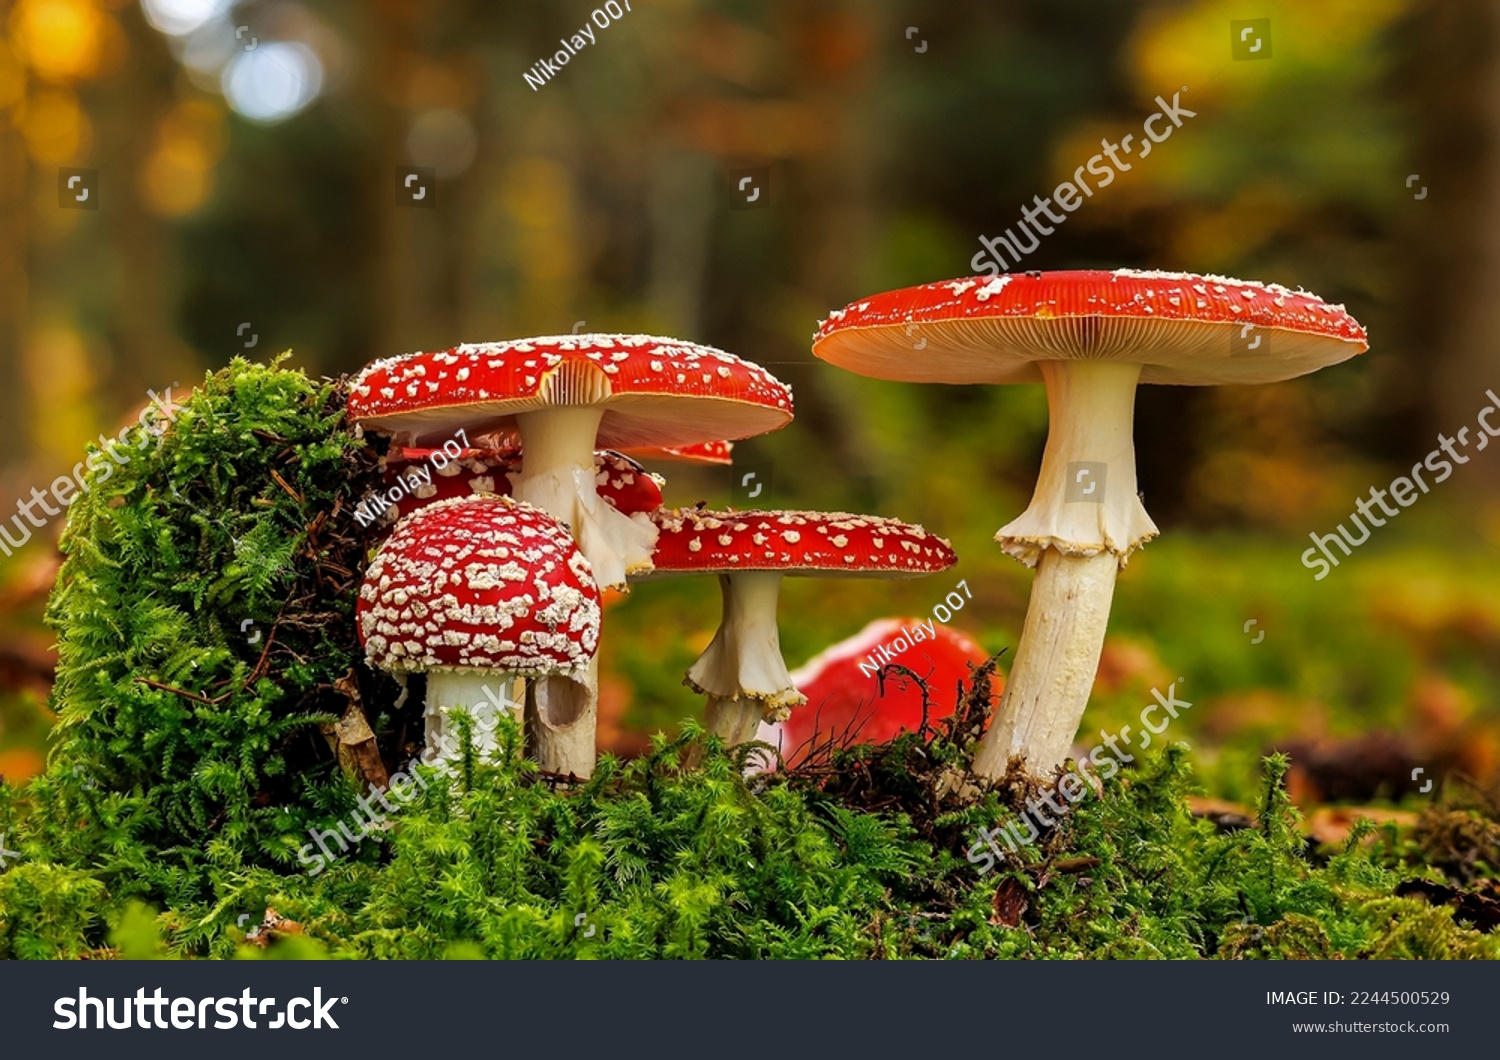 The family of fly agarics in forest moss. Fly agaric in moff. Fly agaric mushrooms. Fly agaric #2244500529